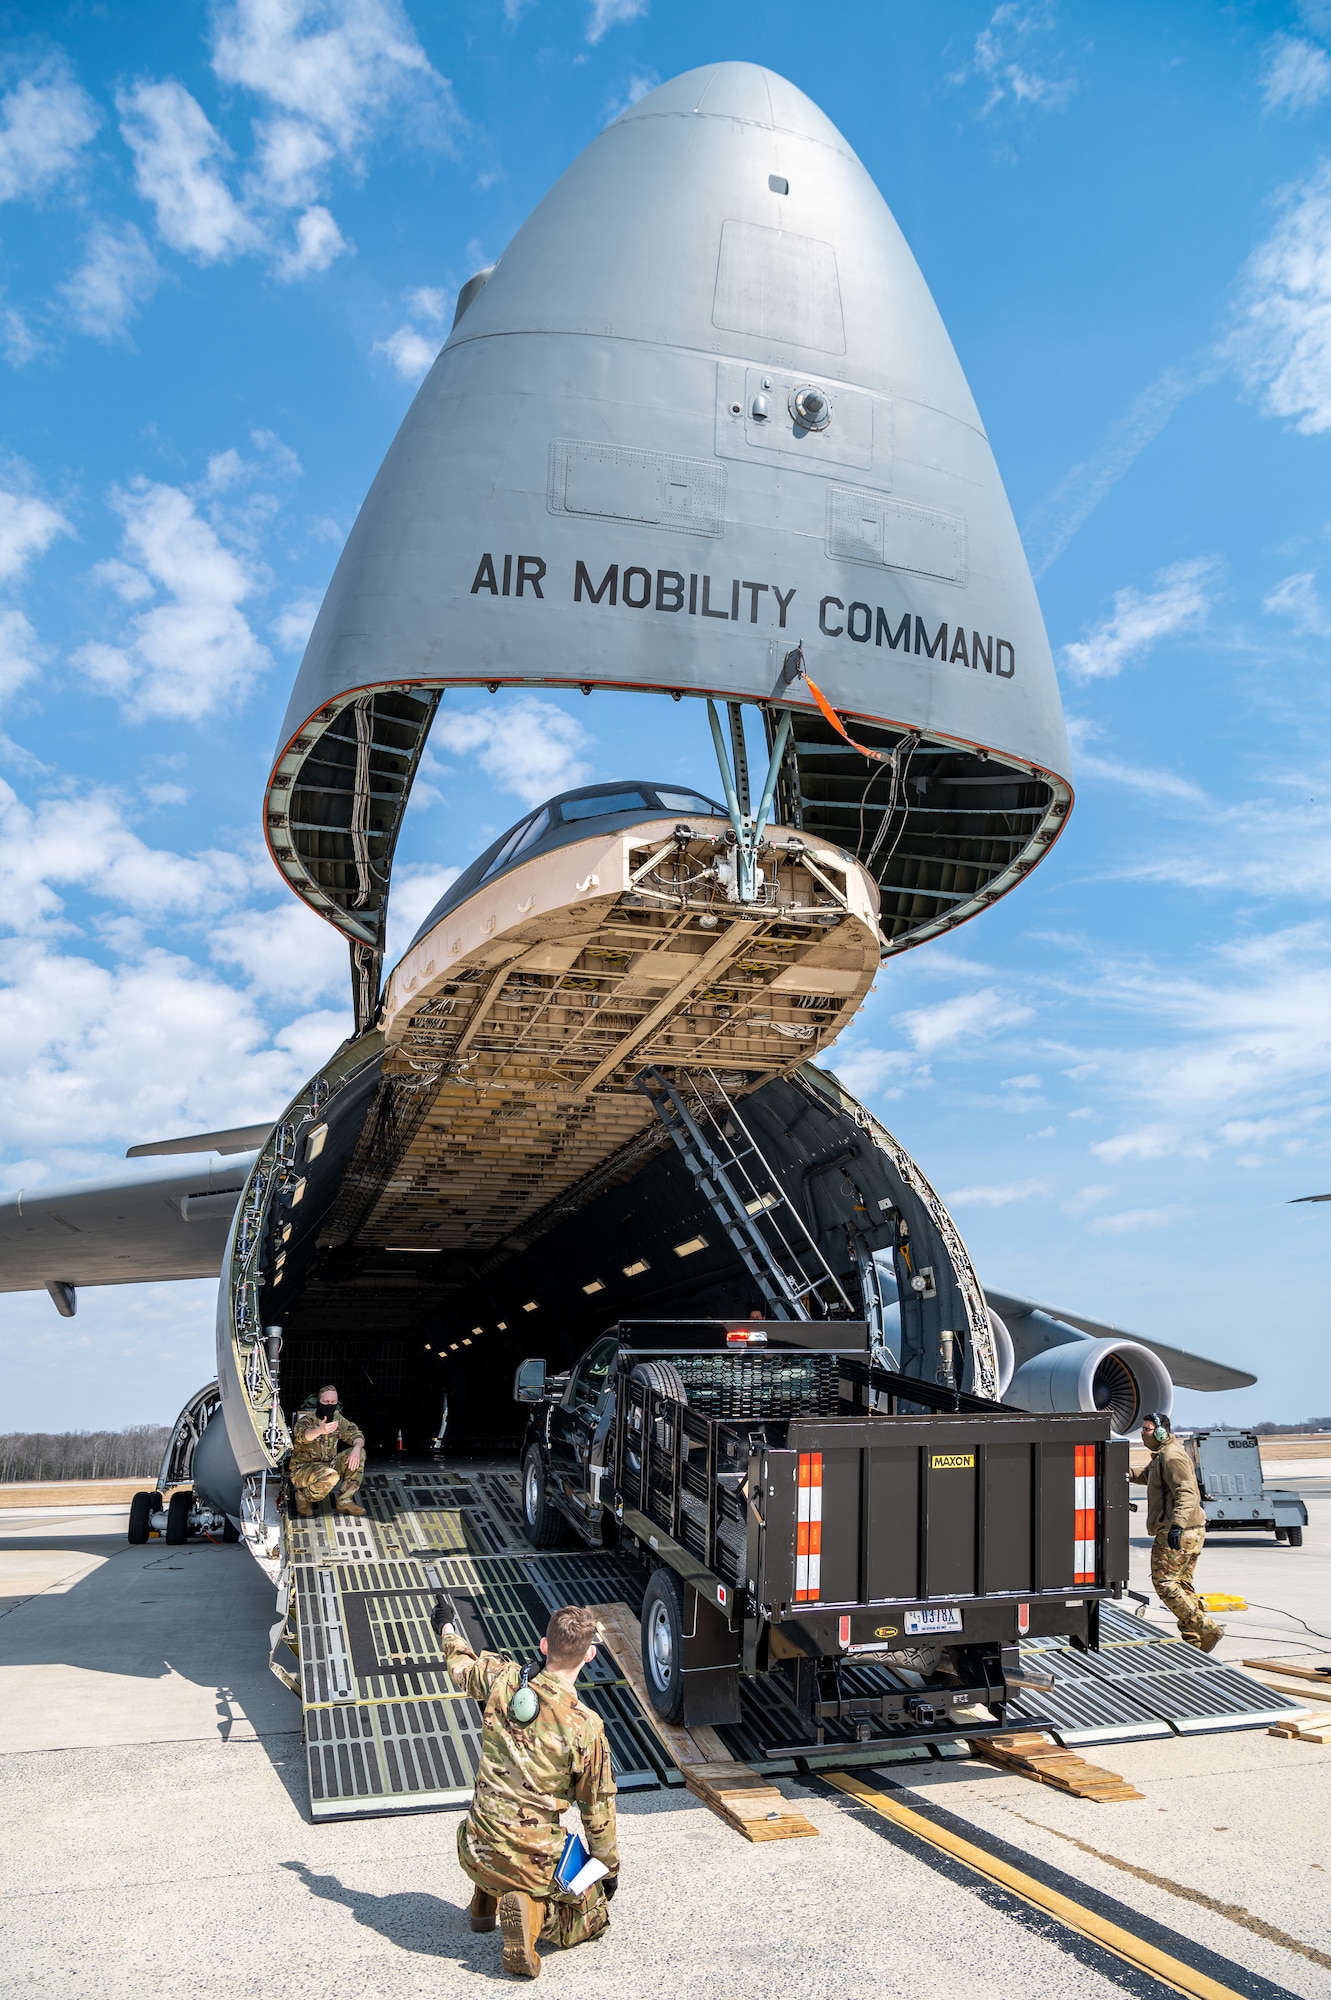 A stake-bed truck is loaded onto a C-5M Super Galaxy during loadmaster training at Dover Air Force Base, Delaware, March 9, 2021. Loadmasters from the 9th Airlift Squadron participated in the training as part of a Major Command Service Tail Trainer initiative driven by Air Mobility Command. The training expedites C-5 loadmaster upgrade training, enabling Dover AFB to provide rapid global airlift. (U.S. Air Force photo by Senior Airman Christopher Quail)